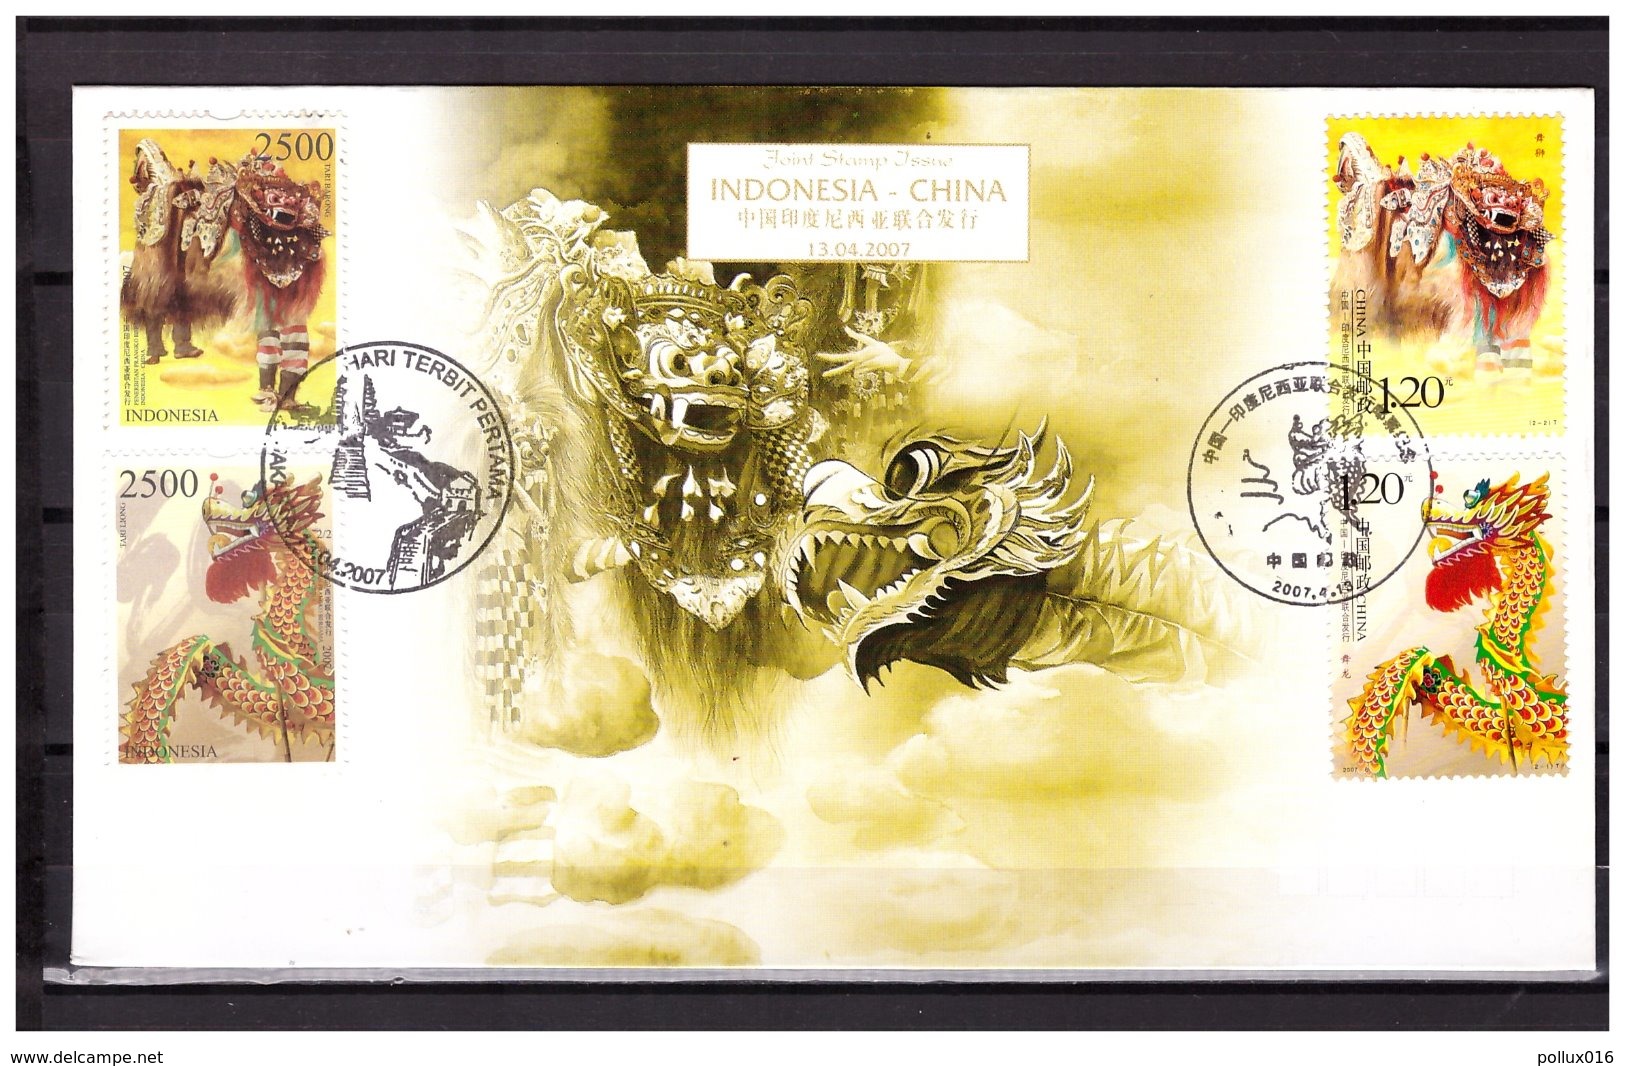 Indonesia 2007 FDC Joint Stamp Issue With China Dragon Mask - Indonesia